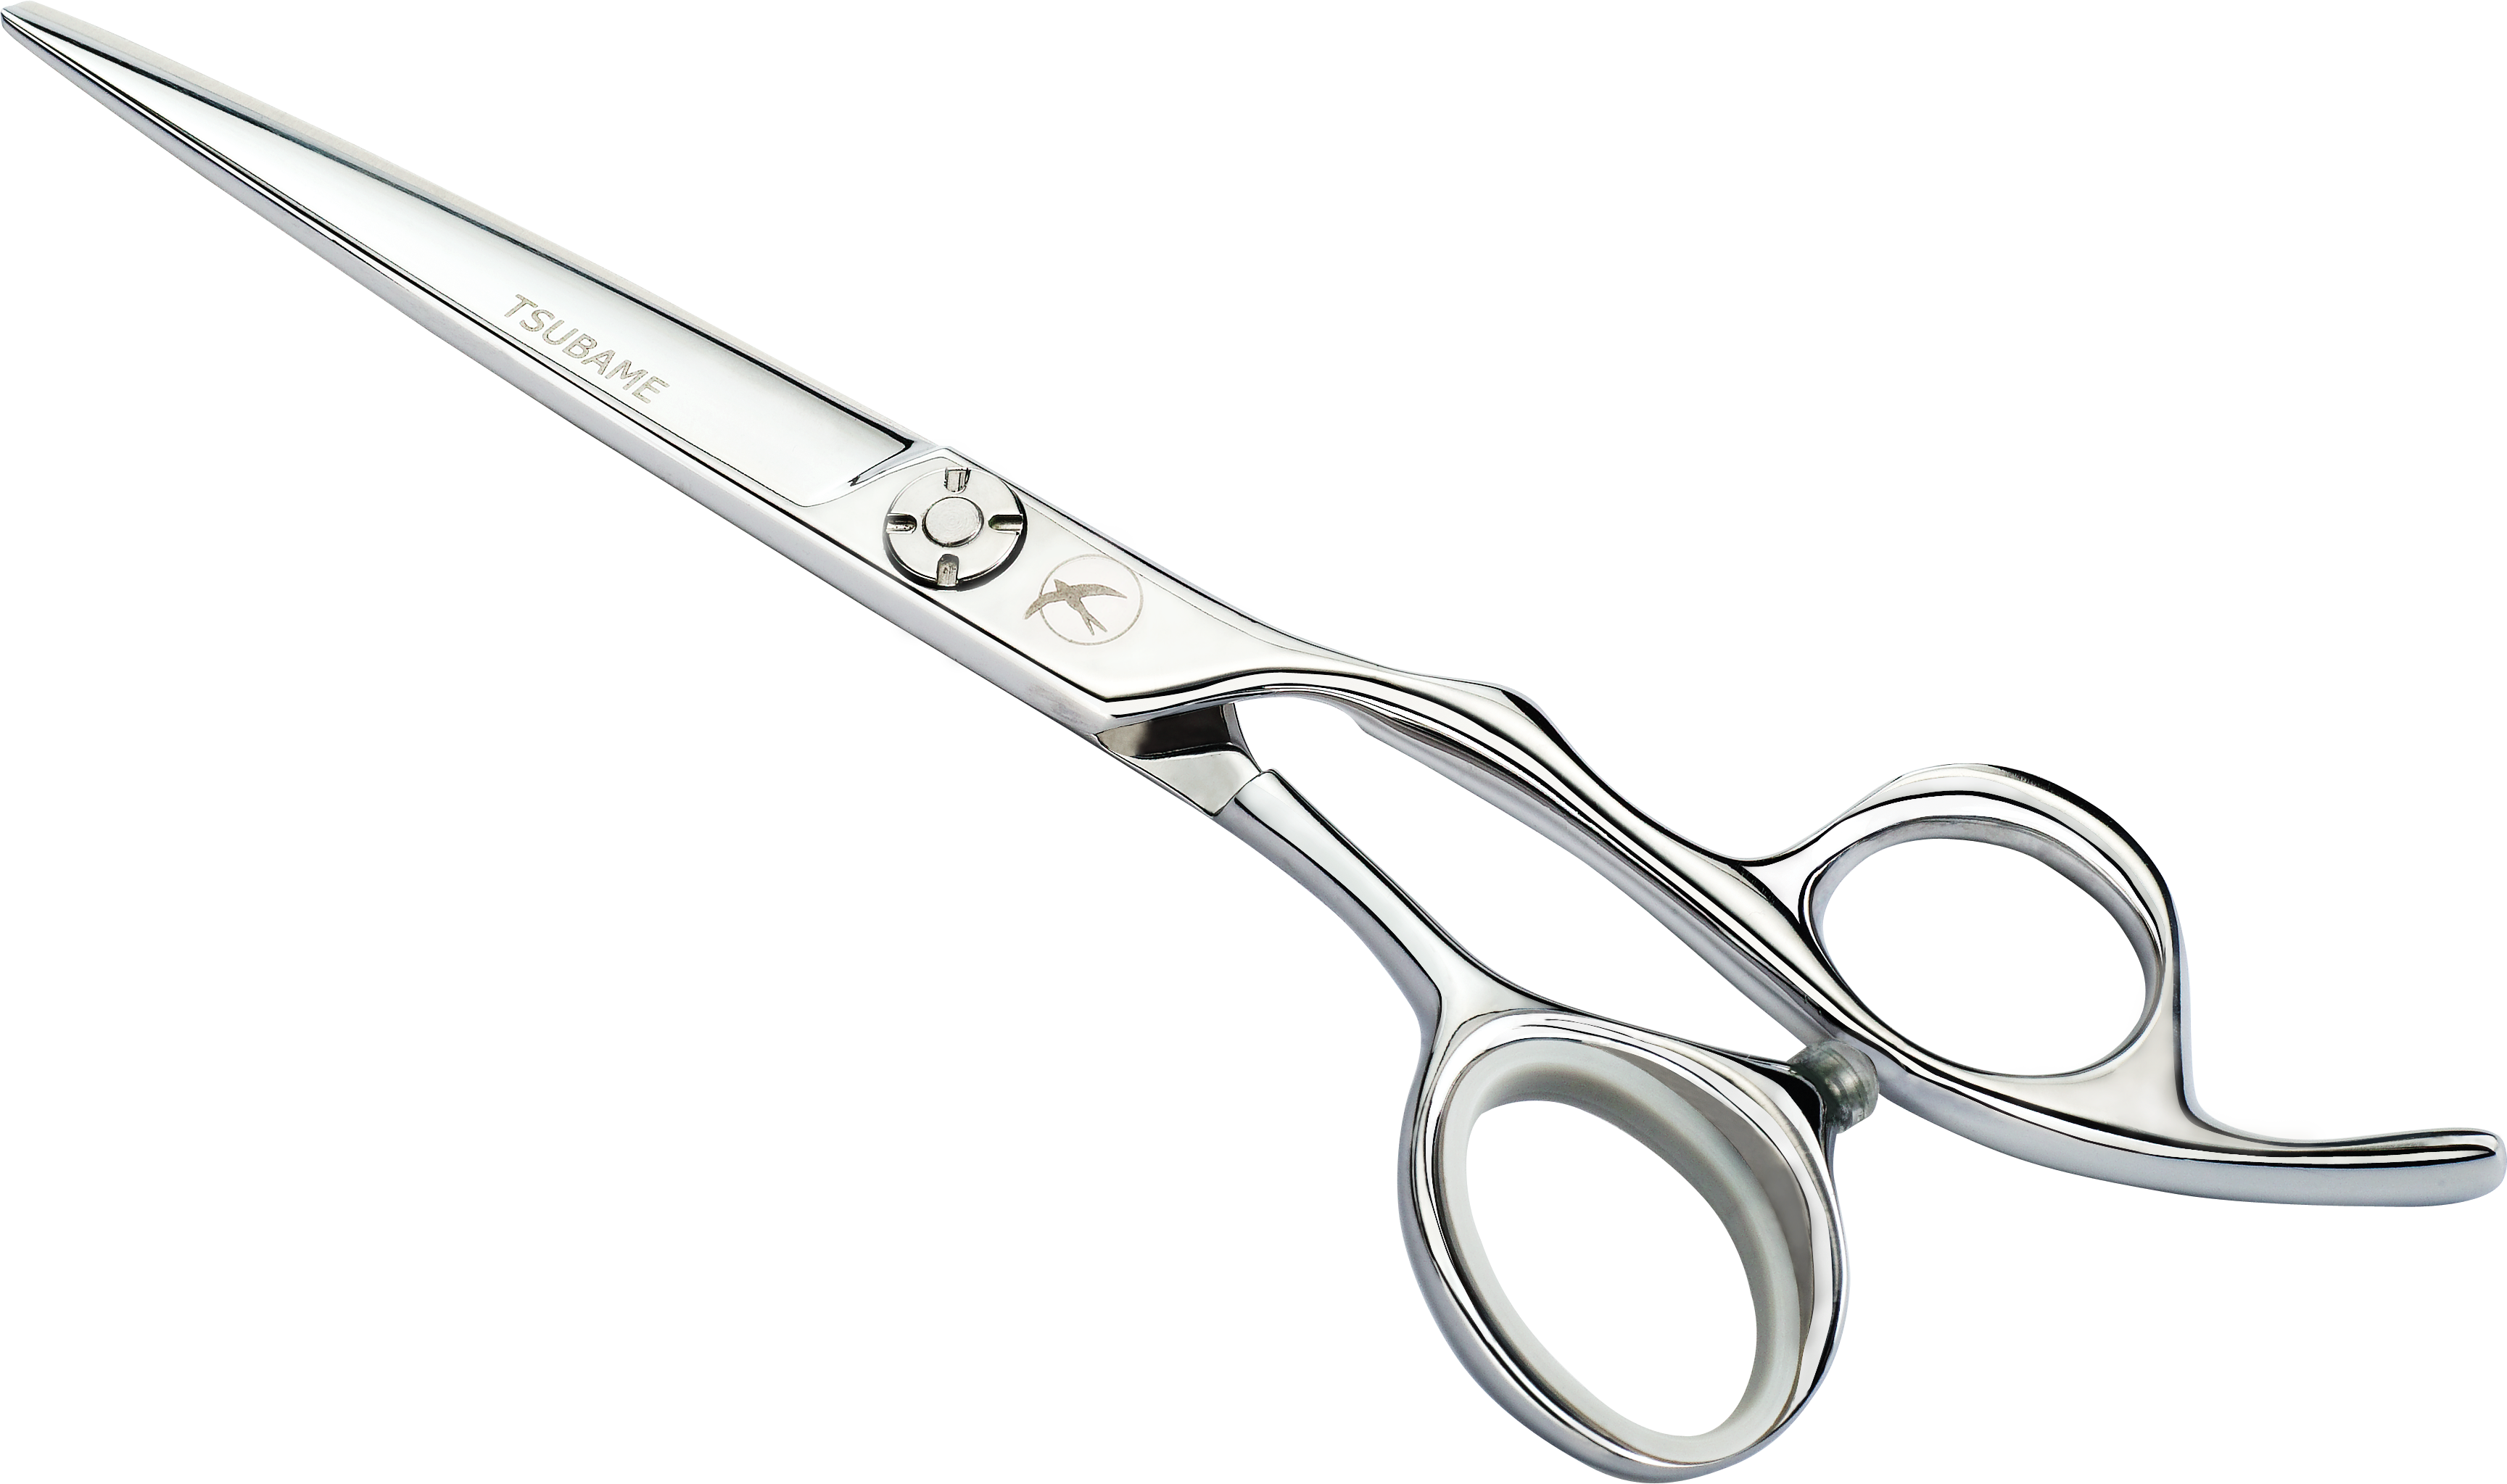 A Pair Of Scissors On A Black Background